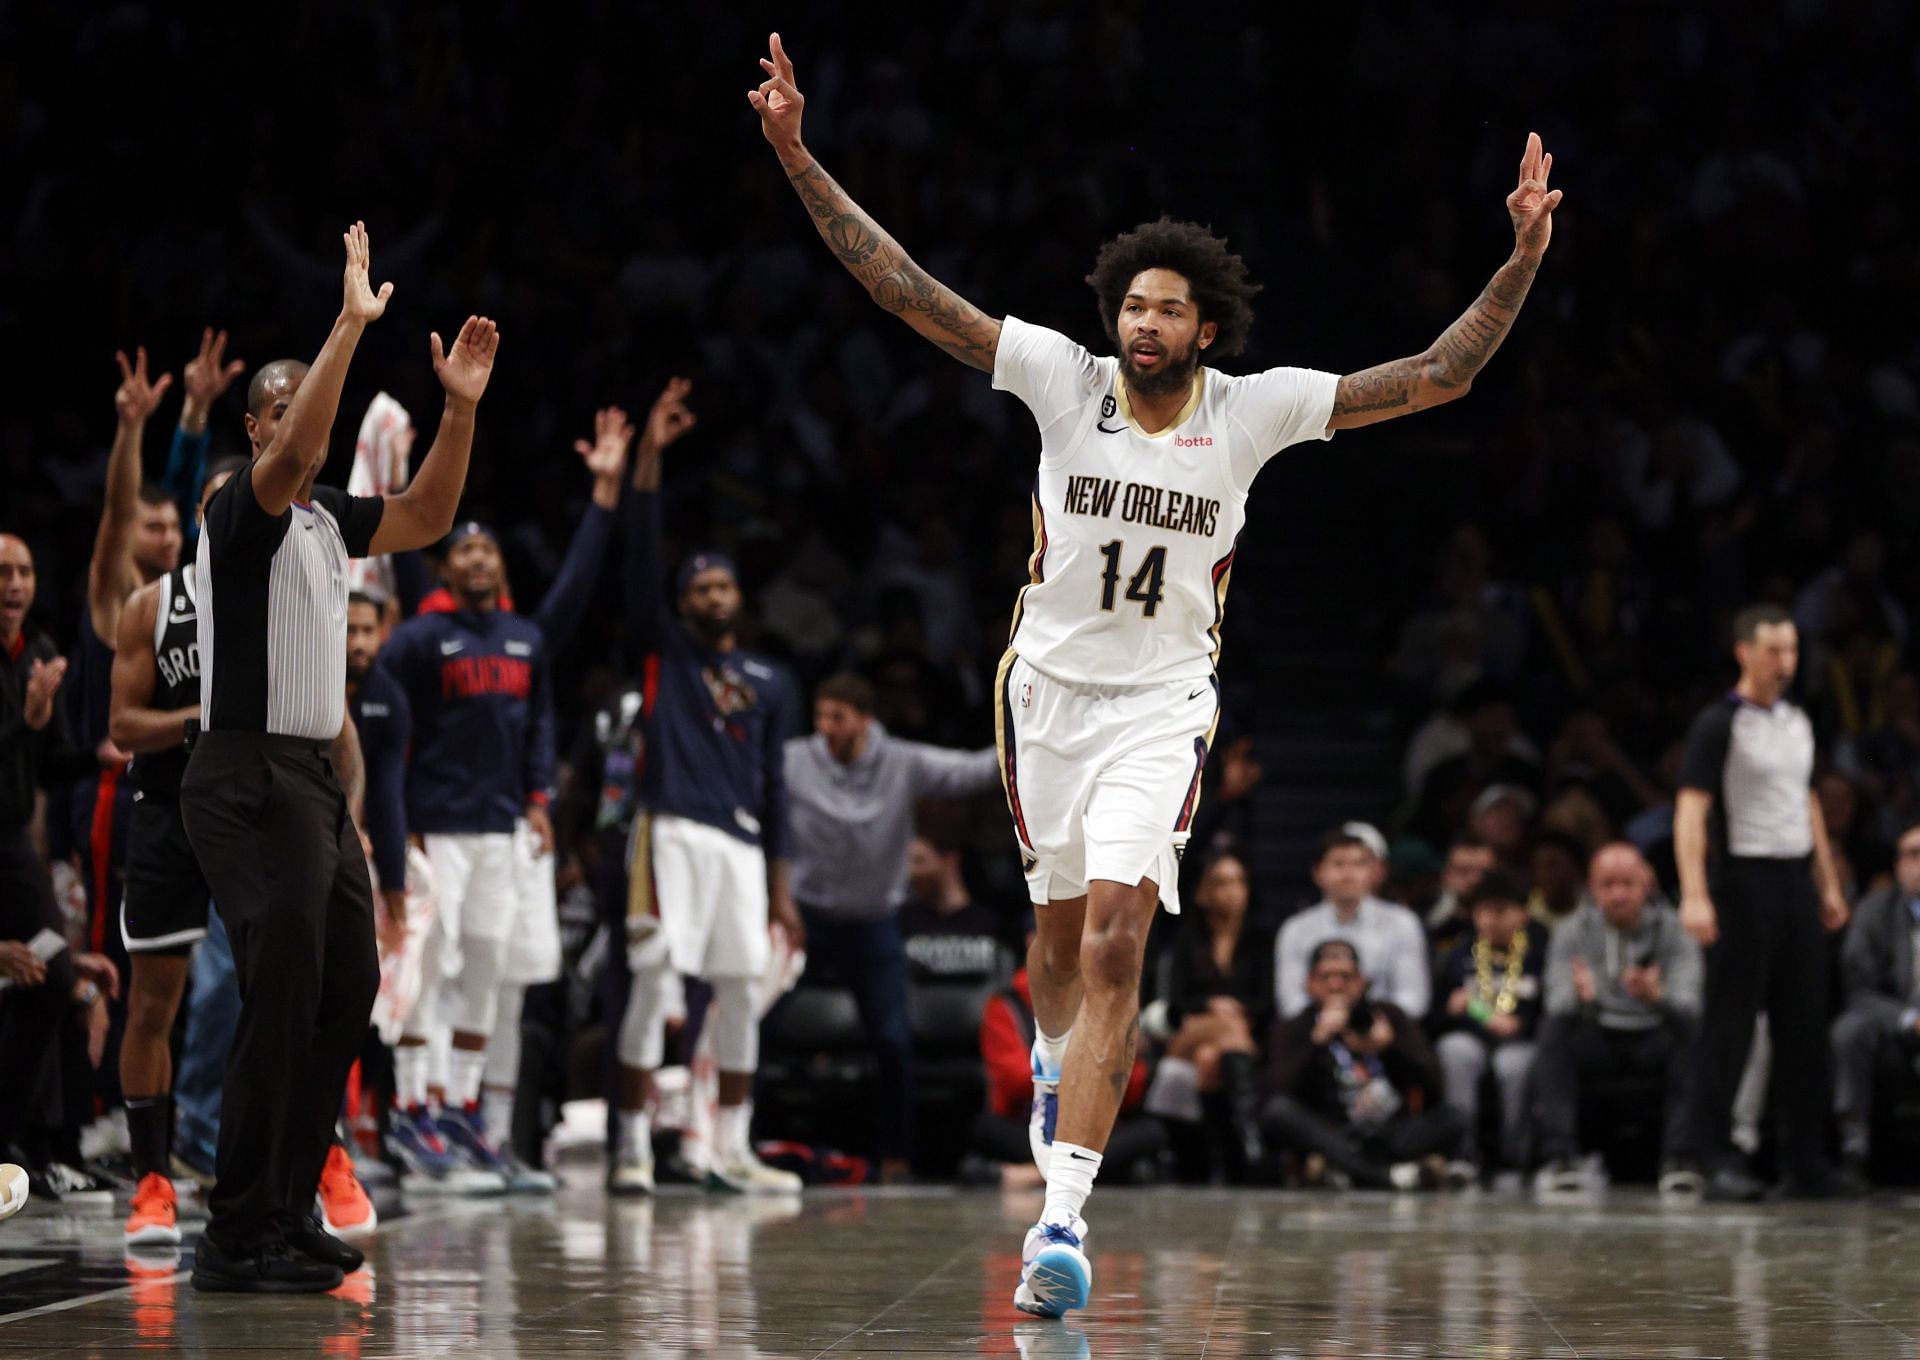 New Orleans Pelicans star Brandon Ingram reacts to a three-pointer